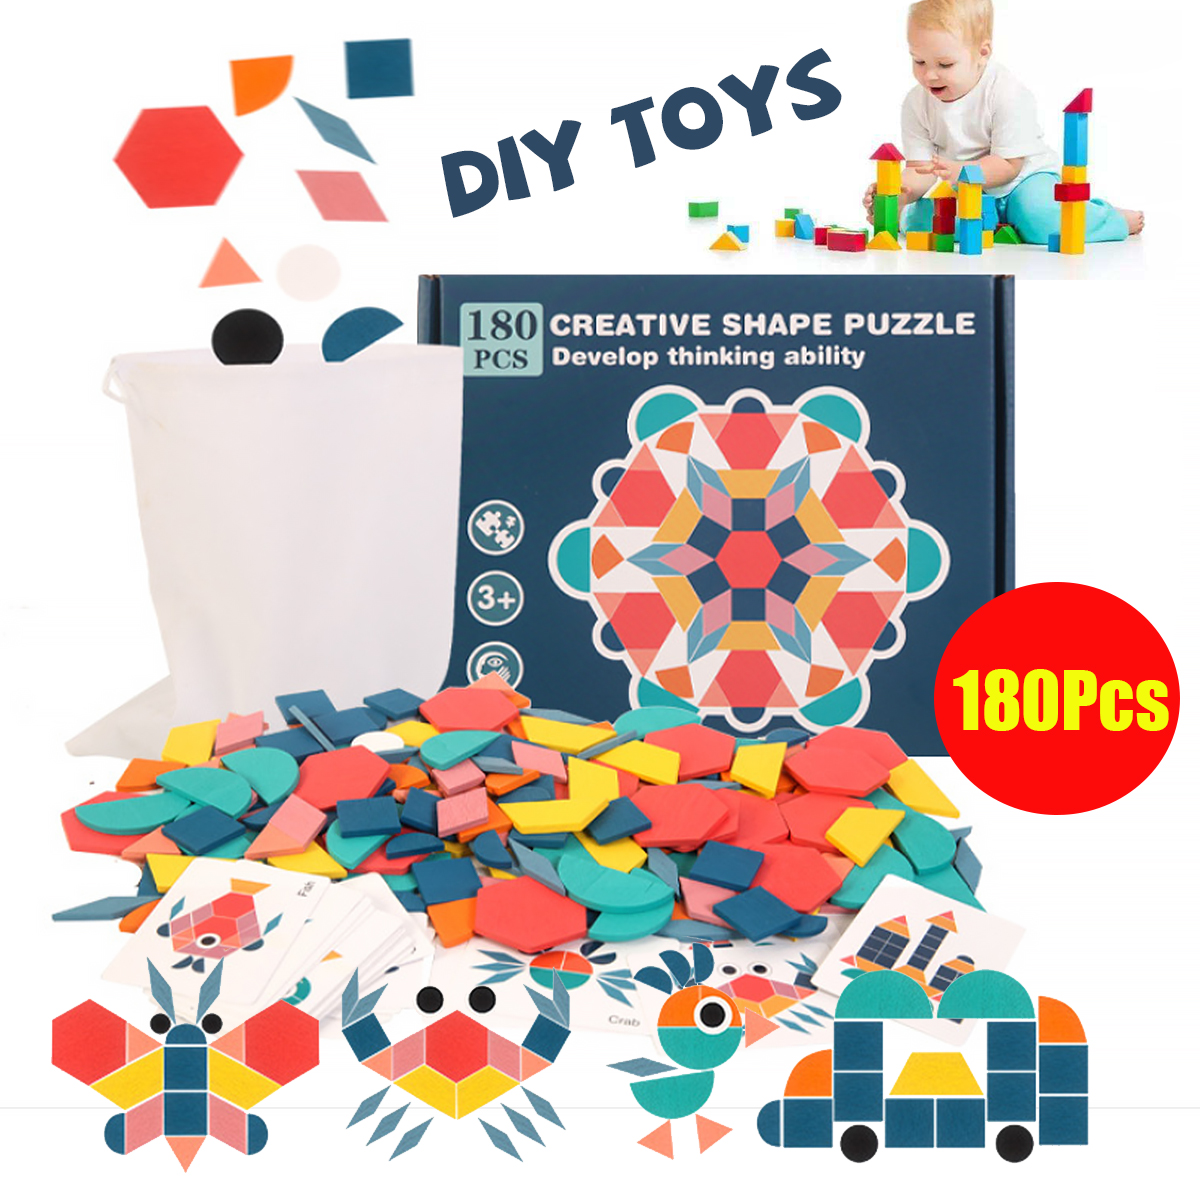 180-Pcs-Colorful-Creative-Multi-Shape-Puzzle-Develop-Thinking-Ability-Educational-Toy-with-Bag-for-K-1733532-2